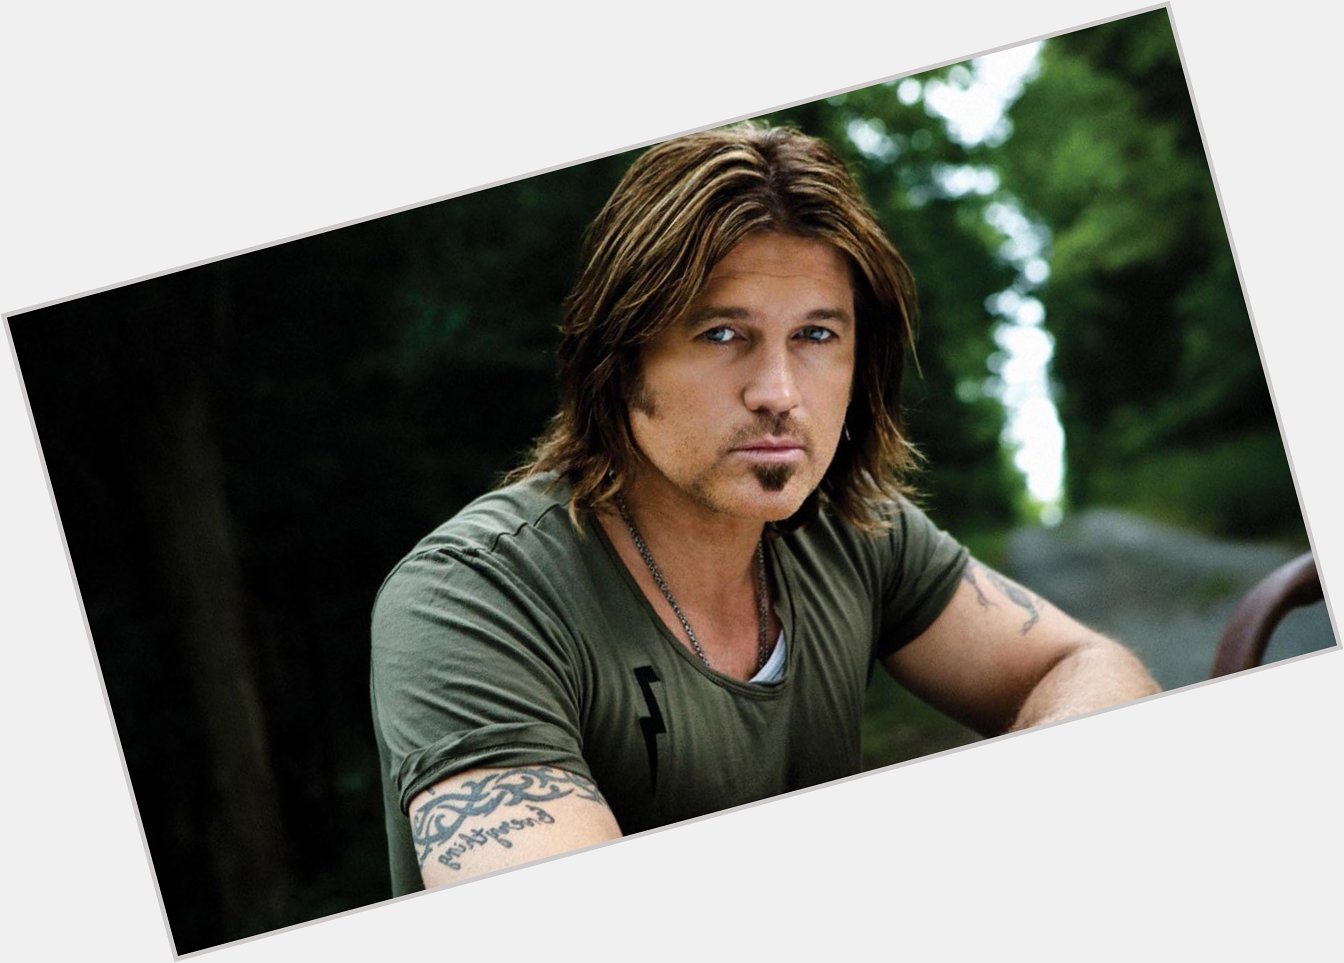 Wishing a very Happy Birthday to Billy Ray Cyrus. He turns 57 today! 